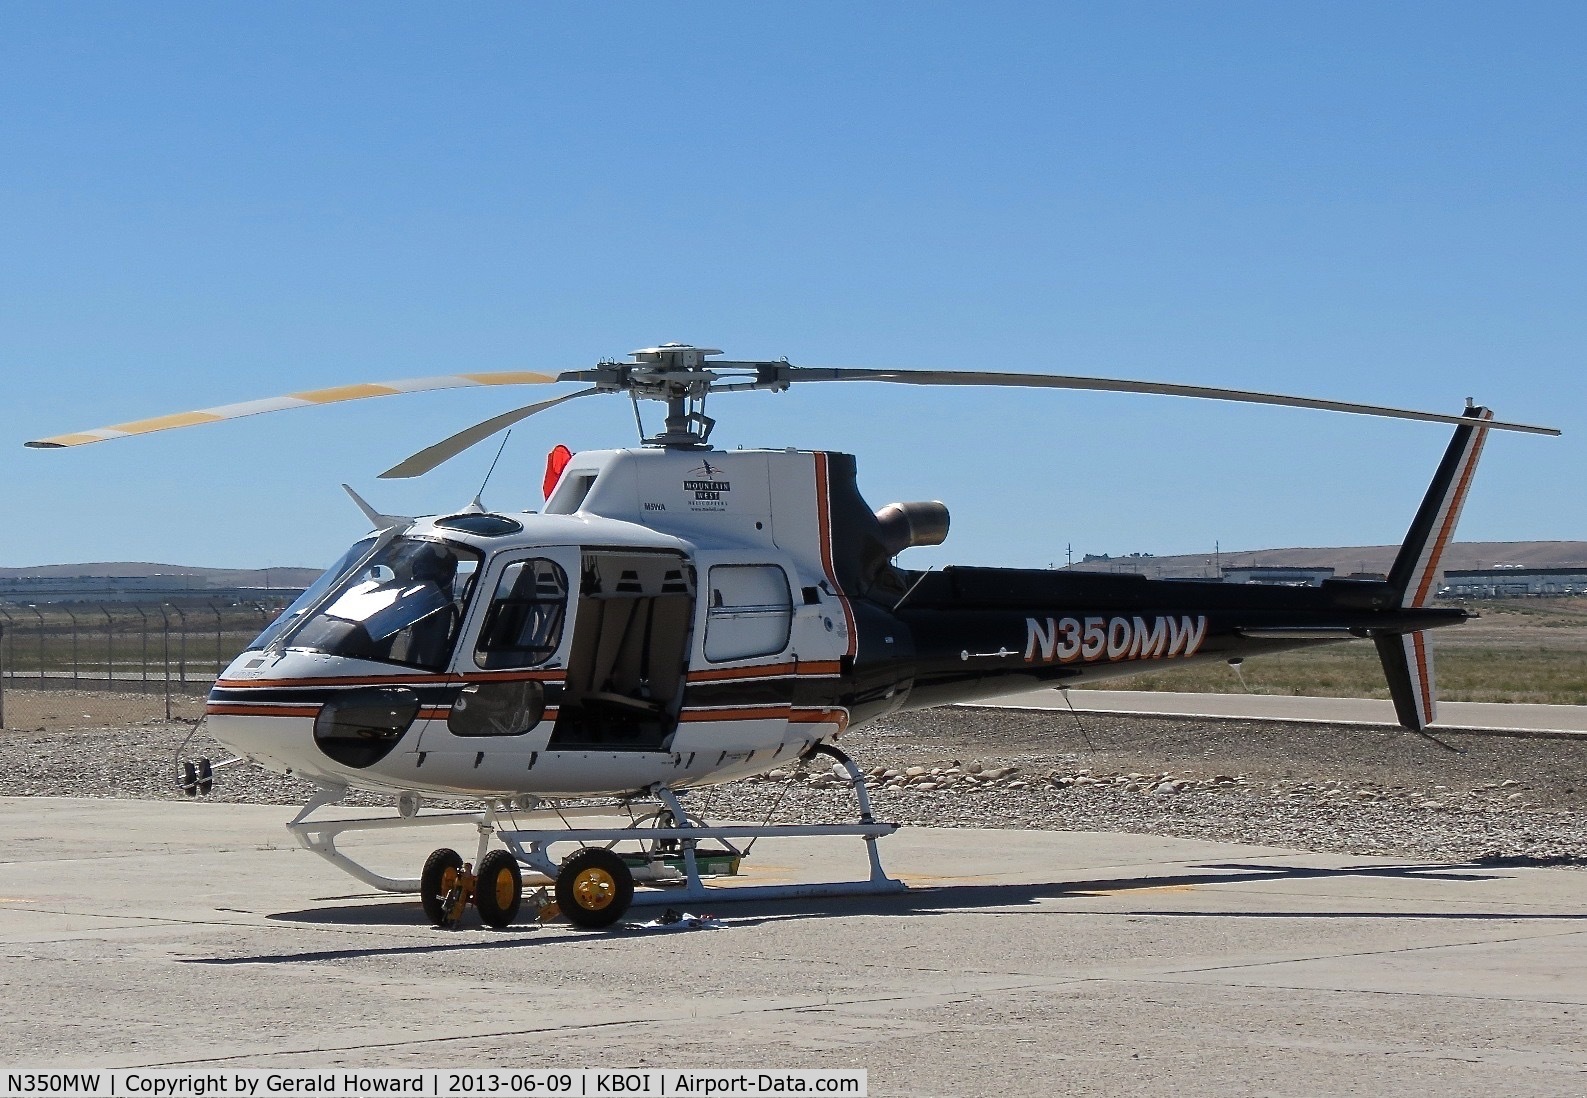 N350MW, 2012 Eurocopter AS-350B-3 Ecureuil Ecureuil C/N 7478, Parked on the BLM ramp.